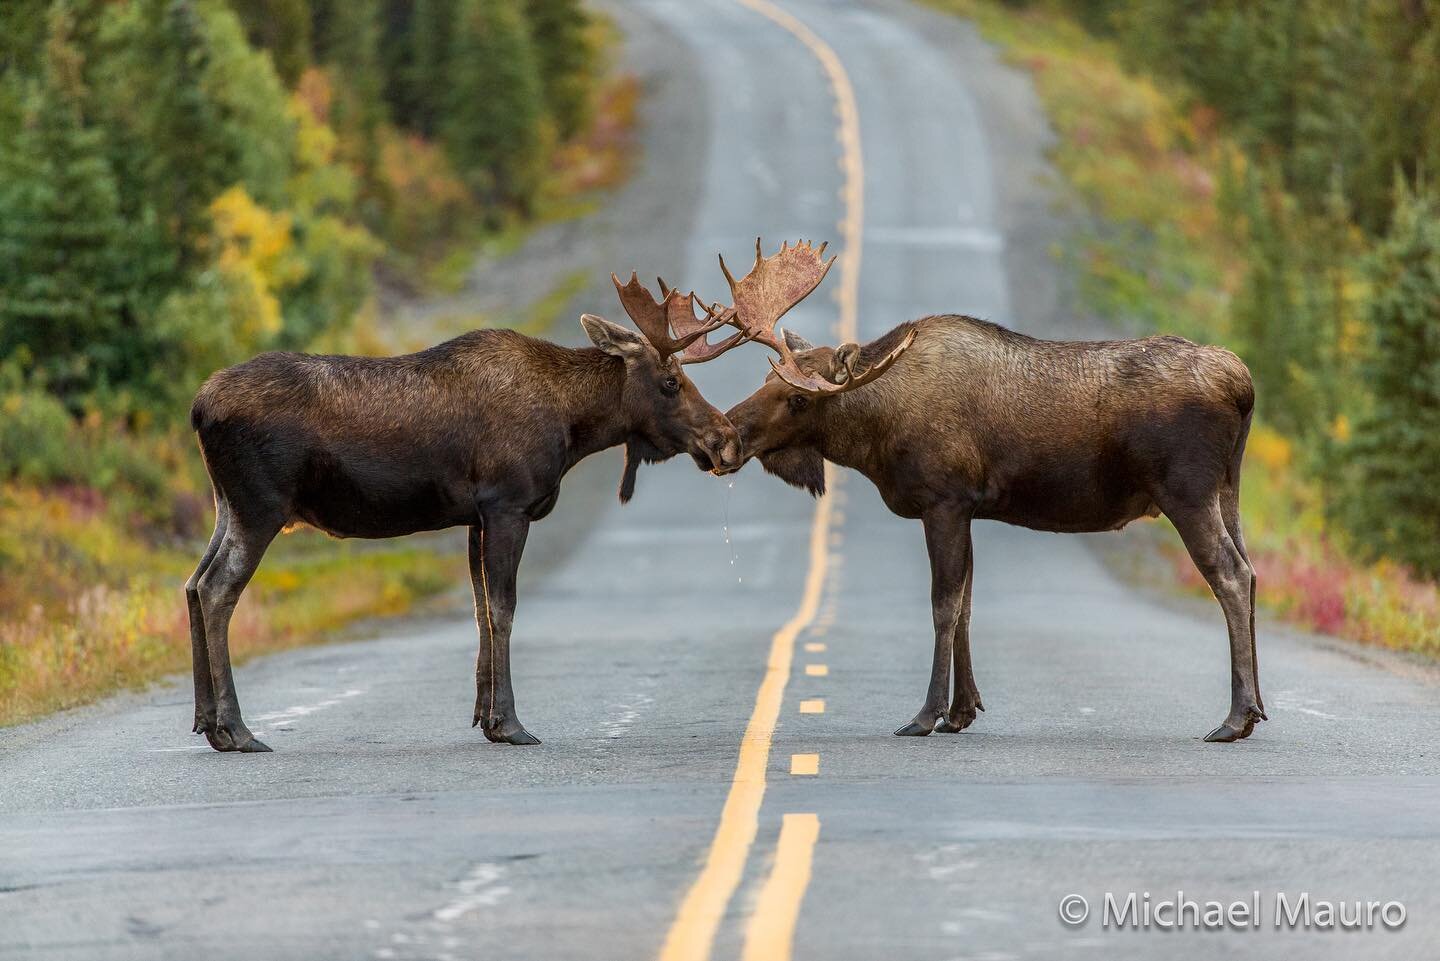 Meet you on the yelllow line at noon for a sniffing contest! Got a better caption let&rsquo;s hear it! Photo by @michaelmaurophoto
&bull;
&bull;
&bull;
#canon #cartoni #backcountry  #redcamera #8K #antlersparring #naturephotography  #moose #nature #a